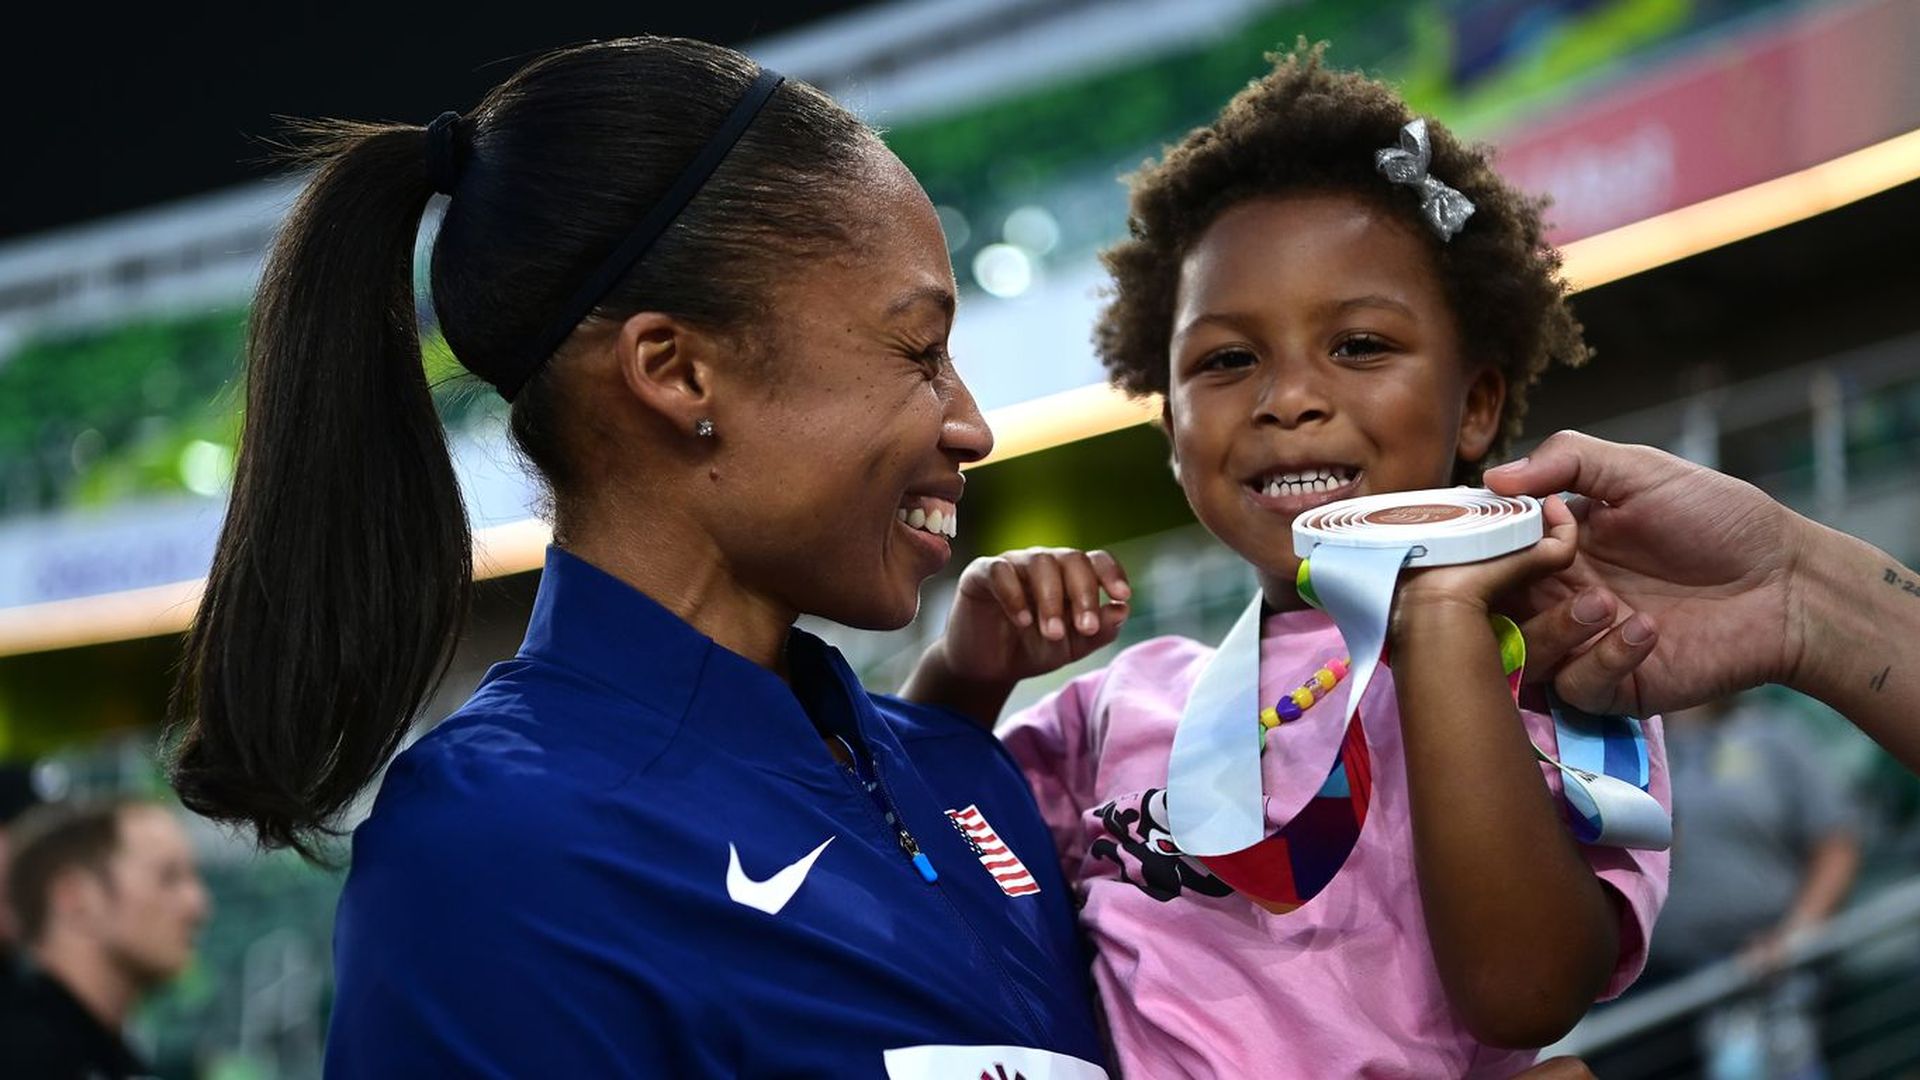 Allyson Felix and her daughter Camryn.